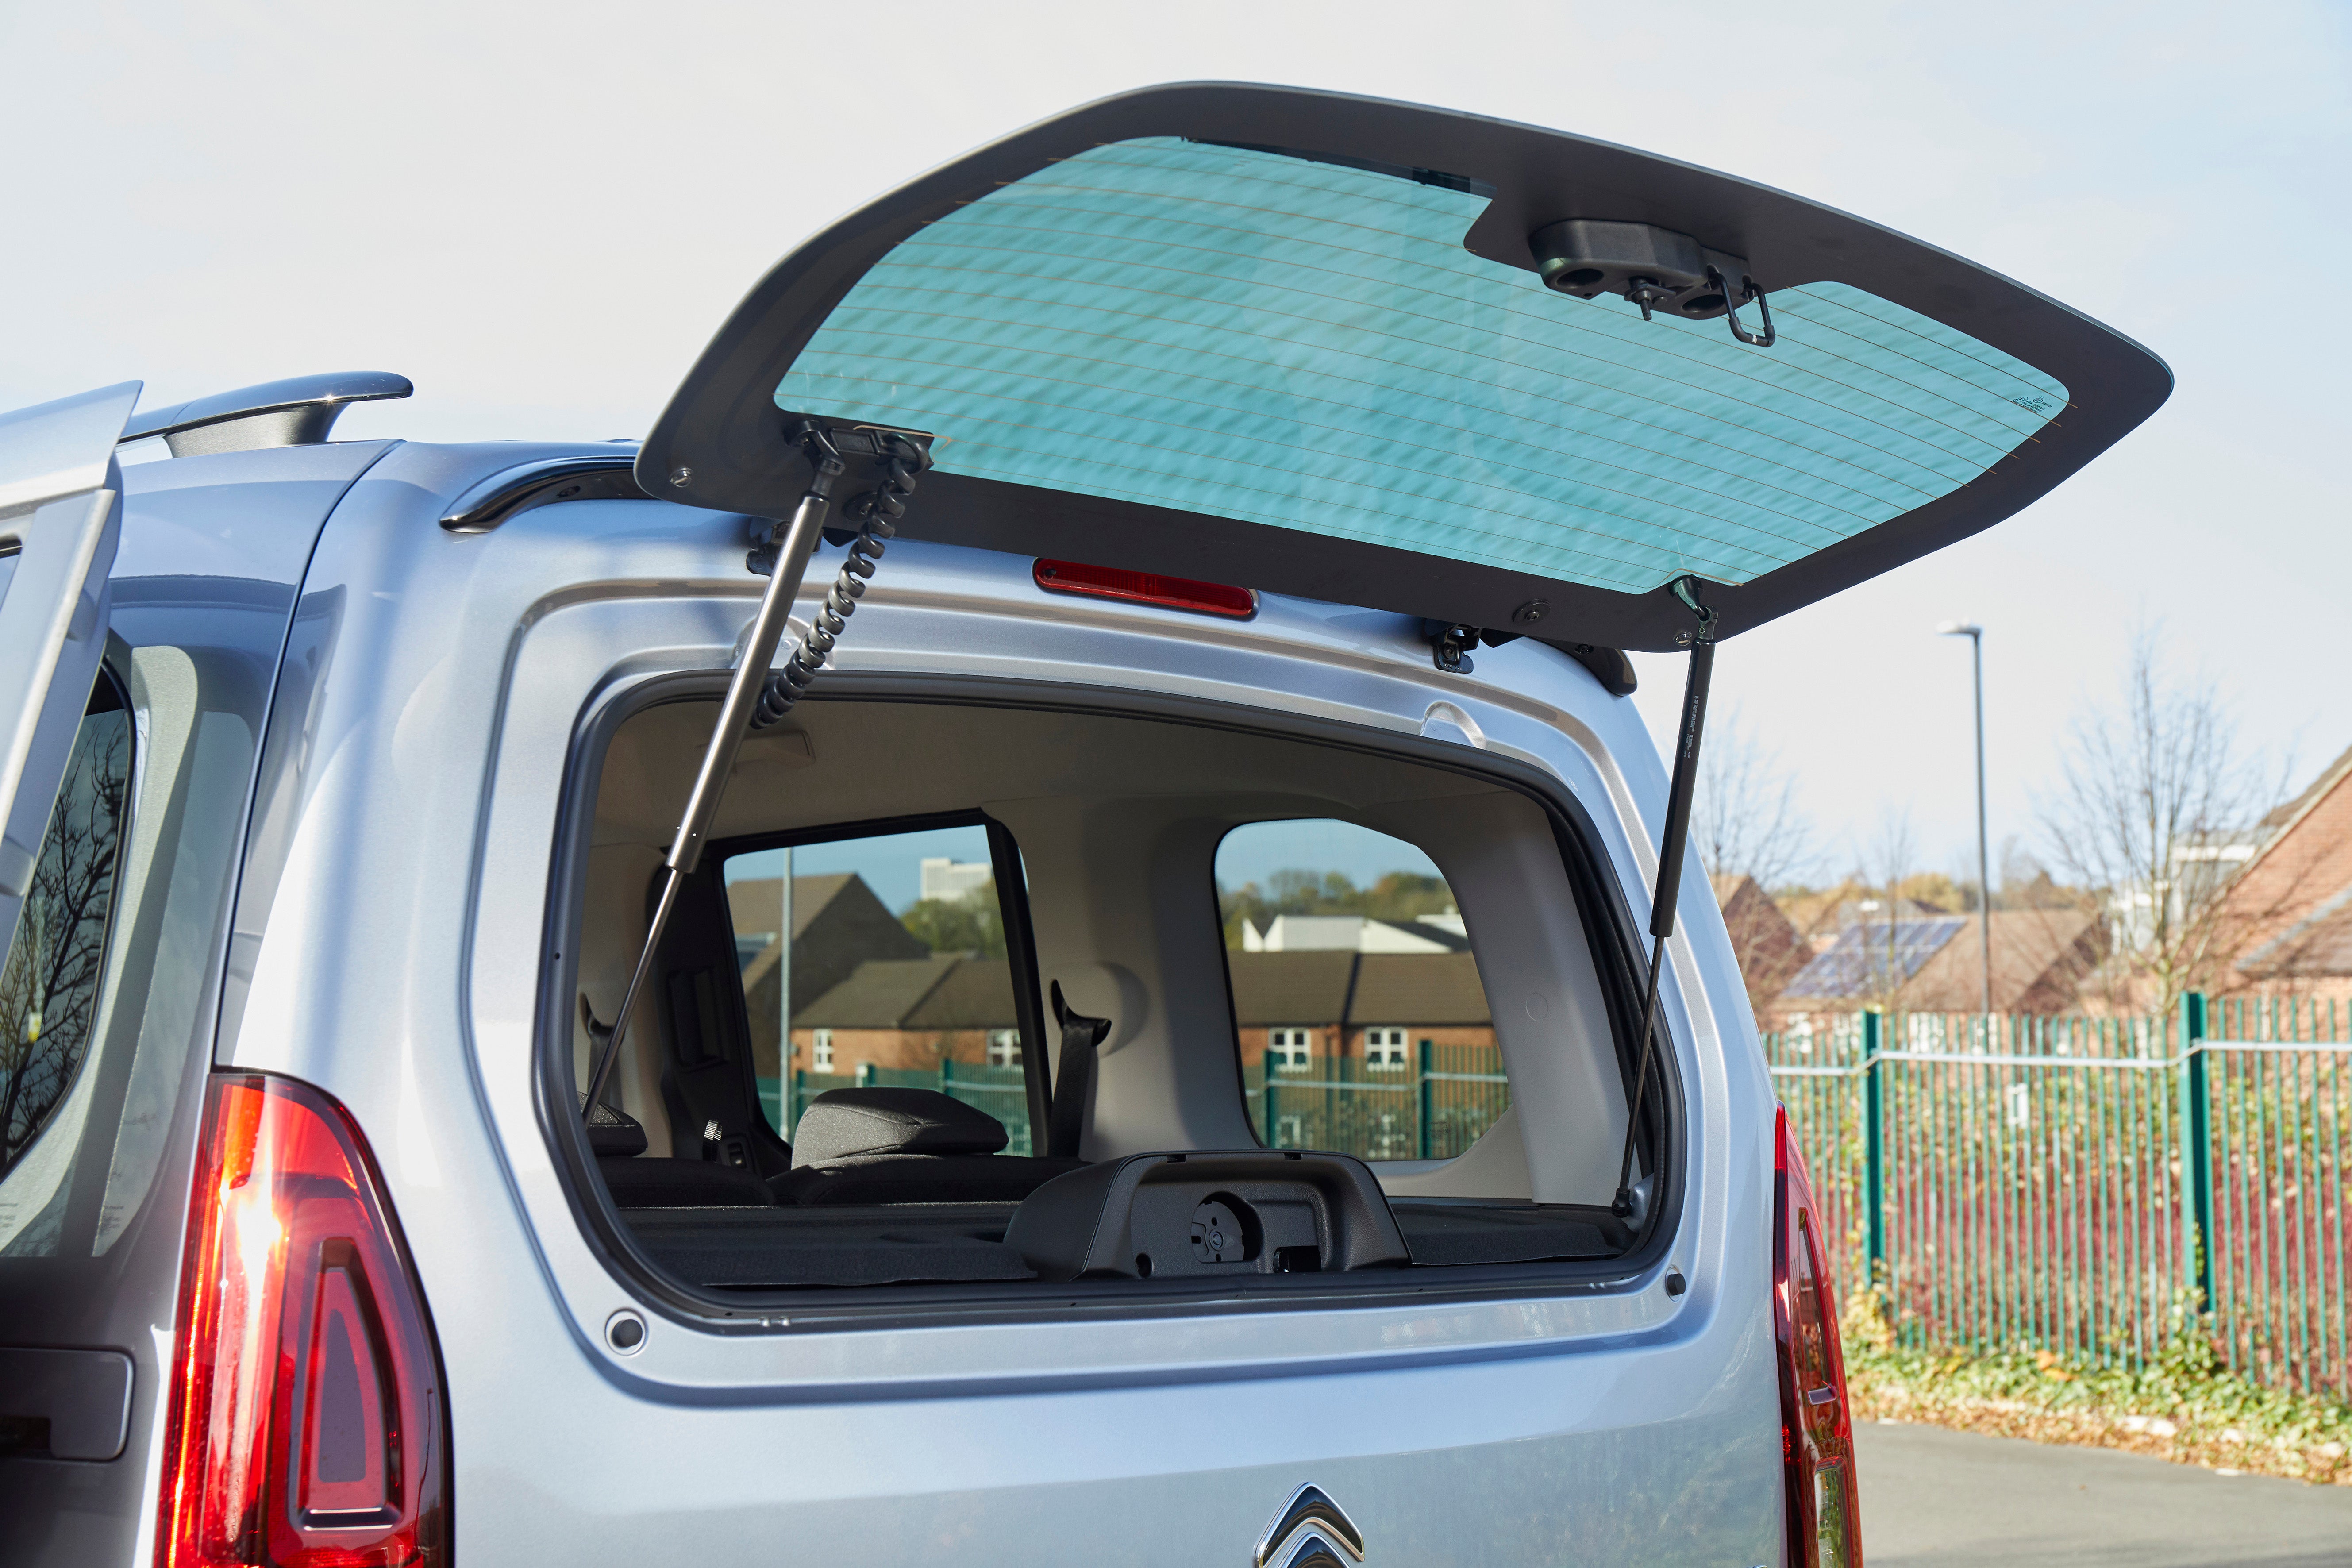 The optional opening rear window improves access to the boot